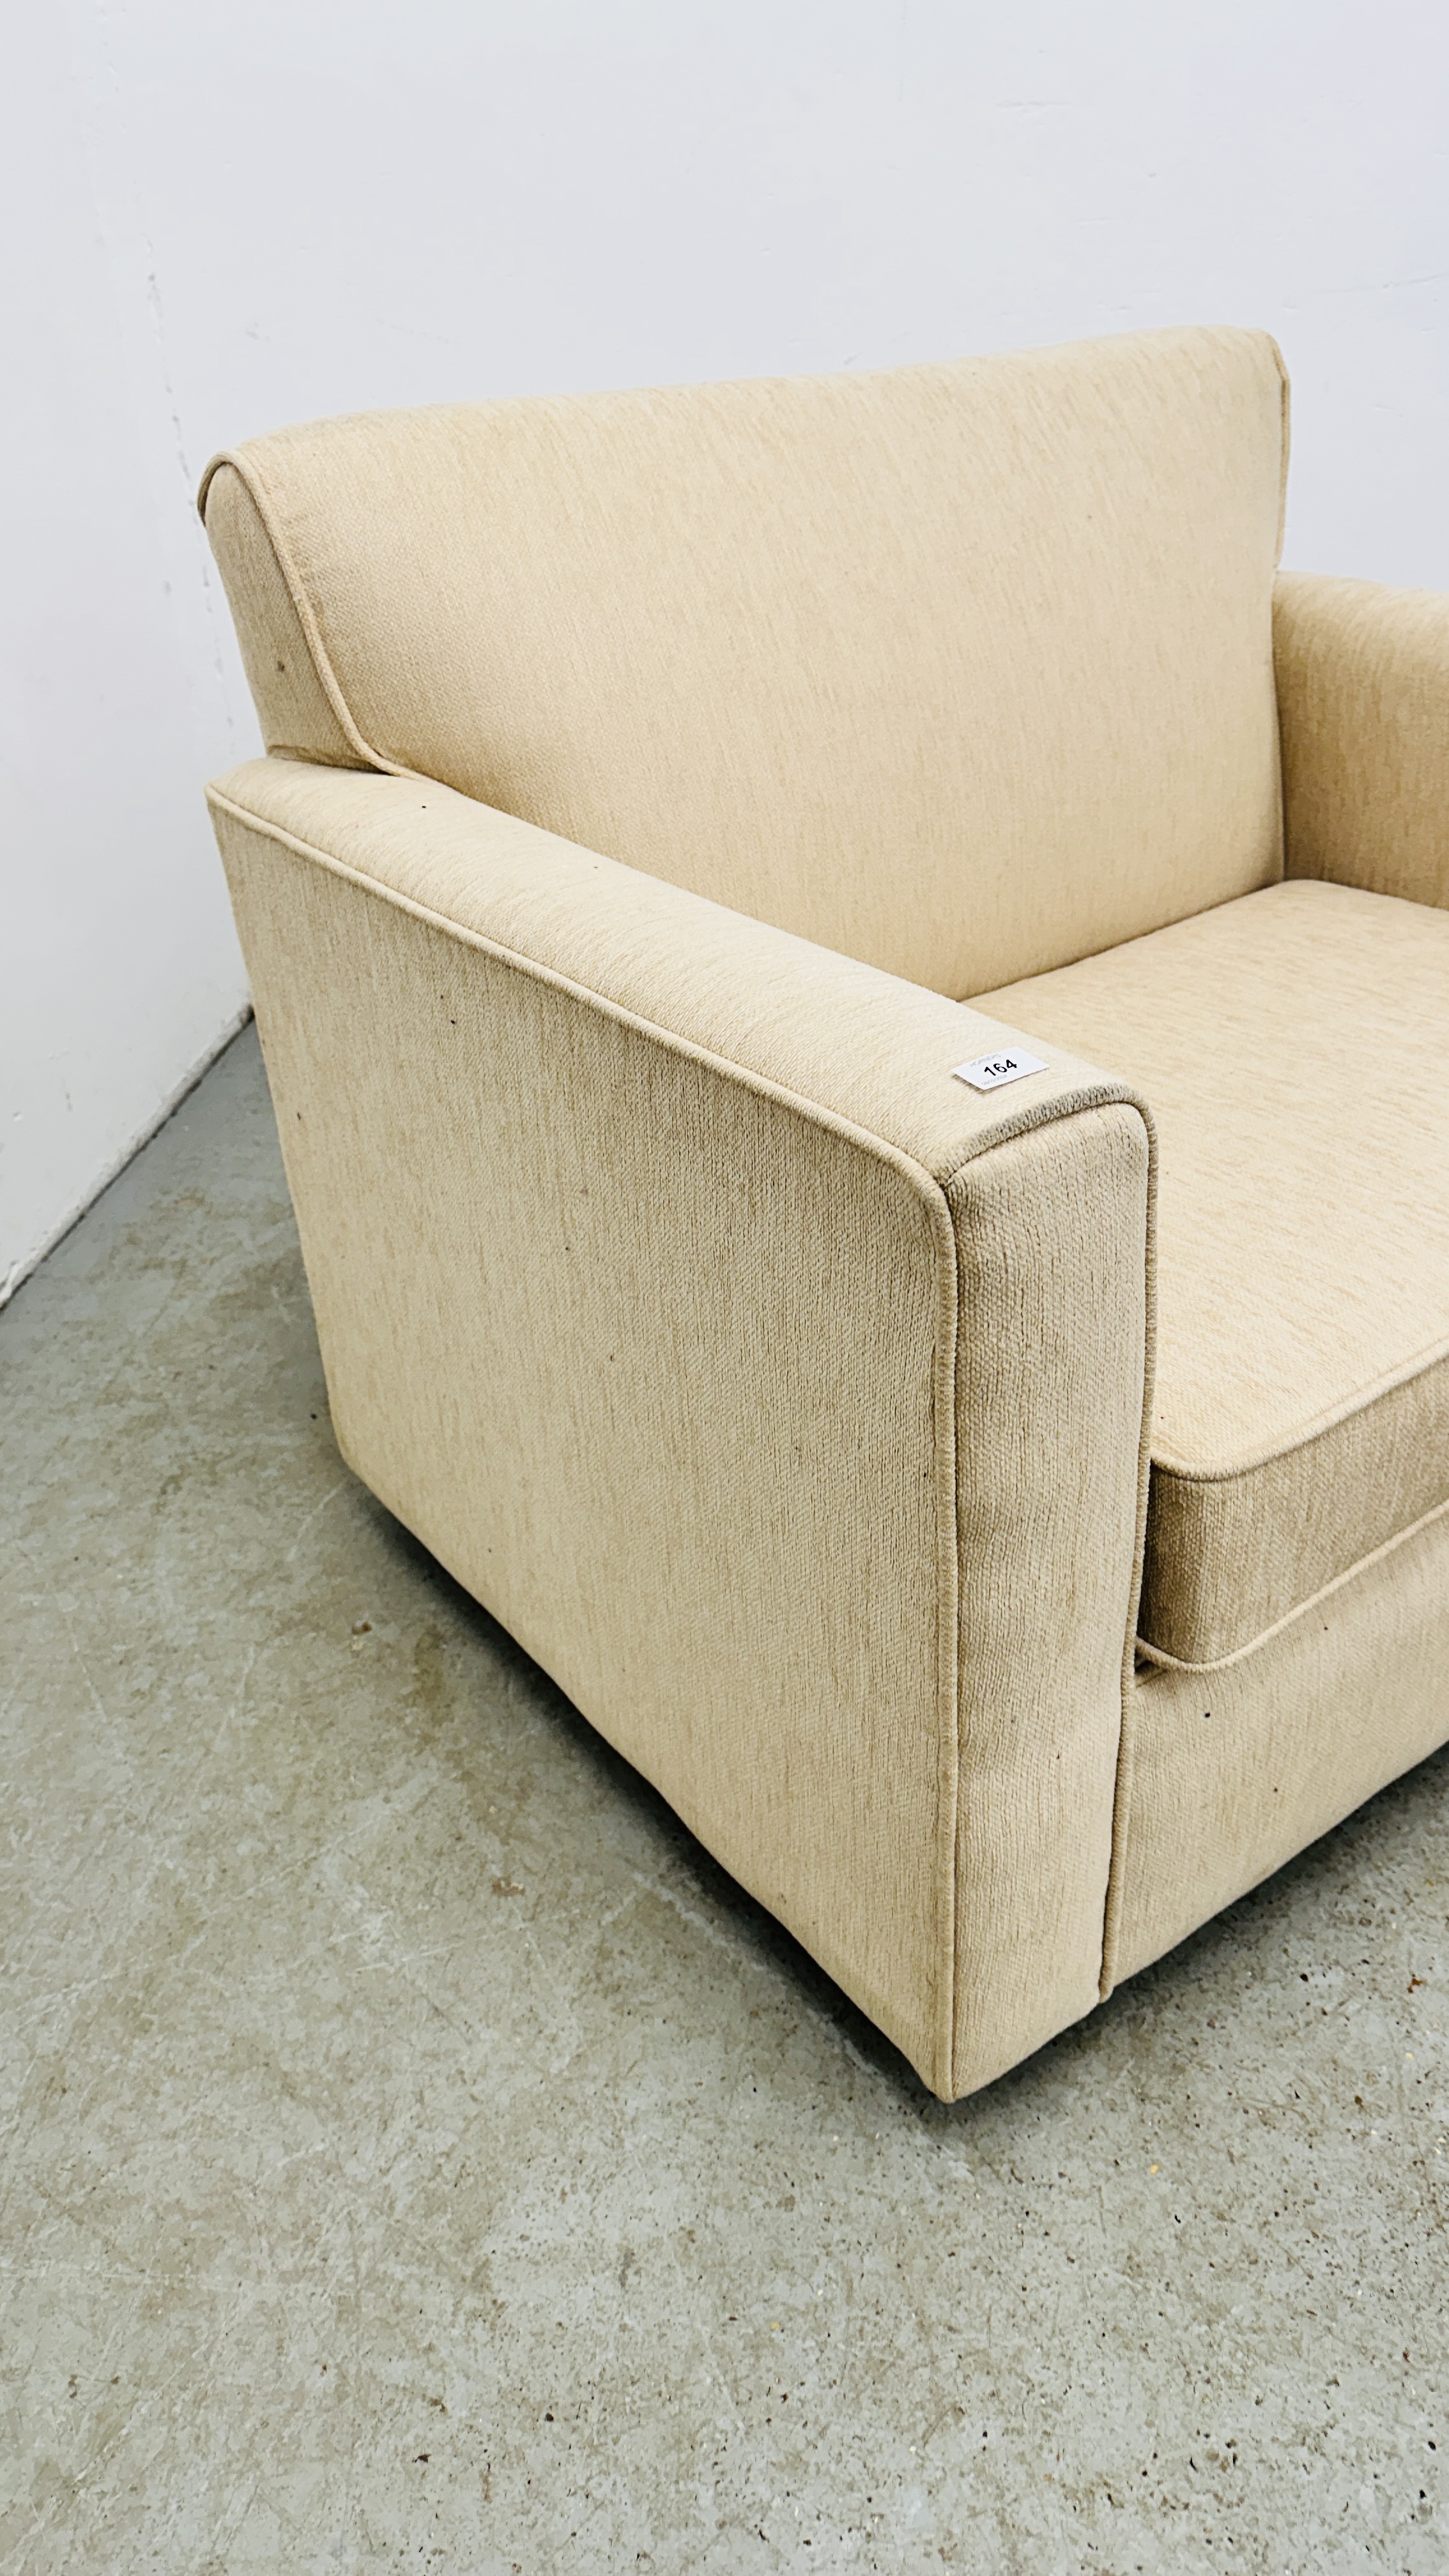 CREAM UPHOLSTERED ARM CHAIR / SOFA BED. - Image 3 of 12